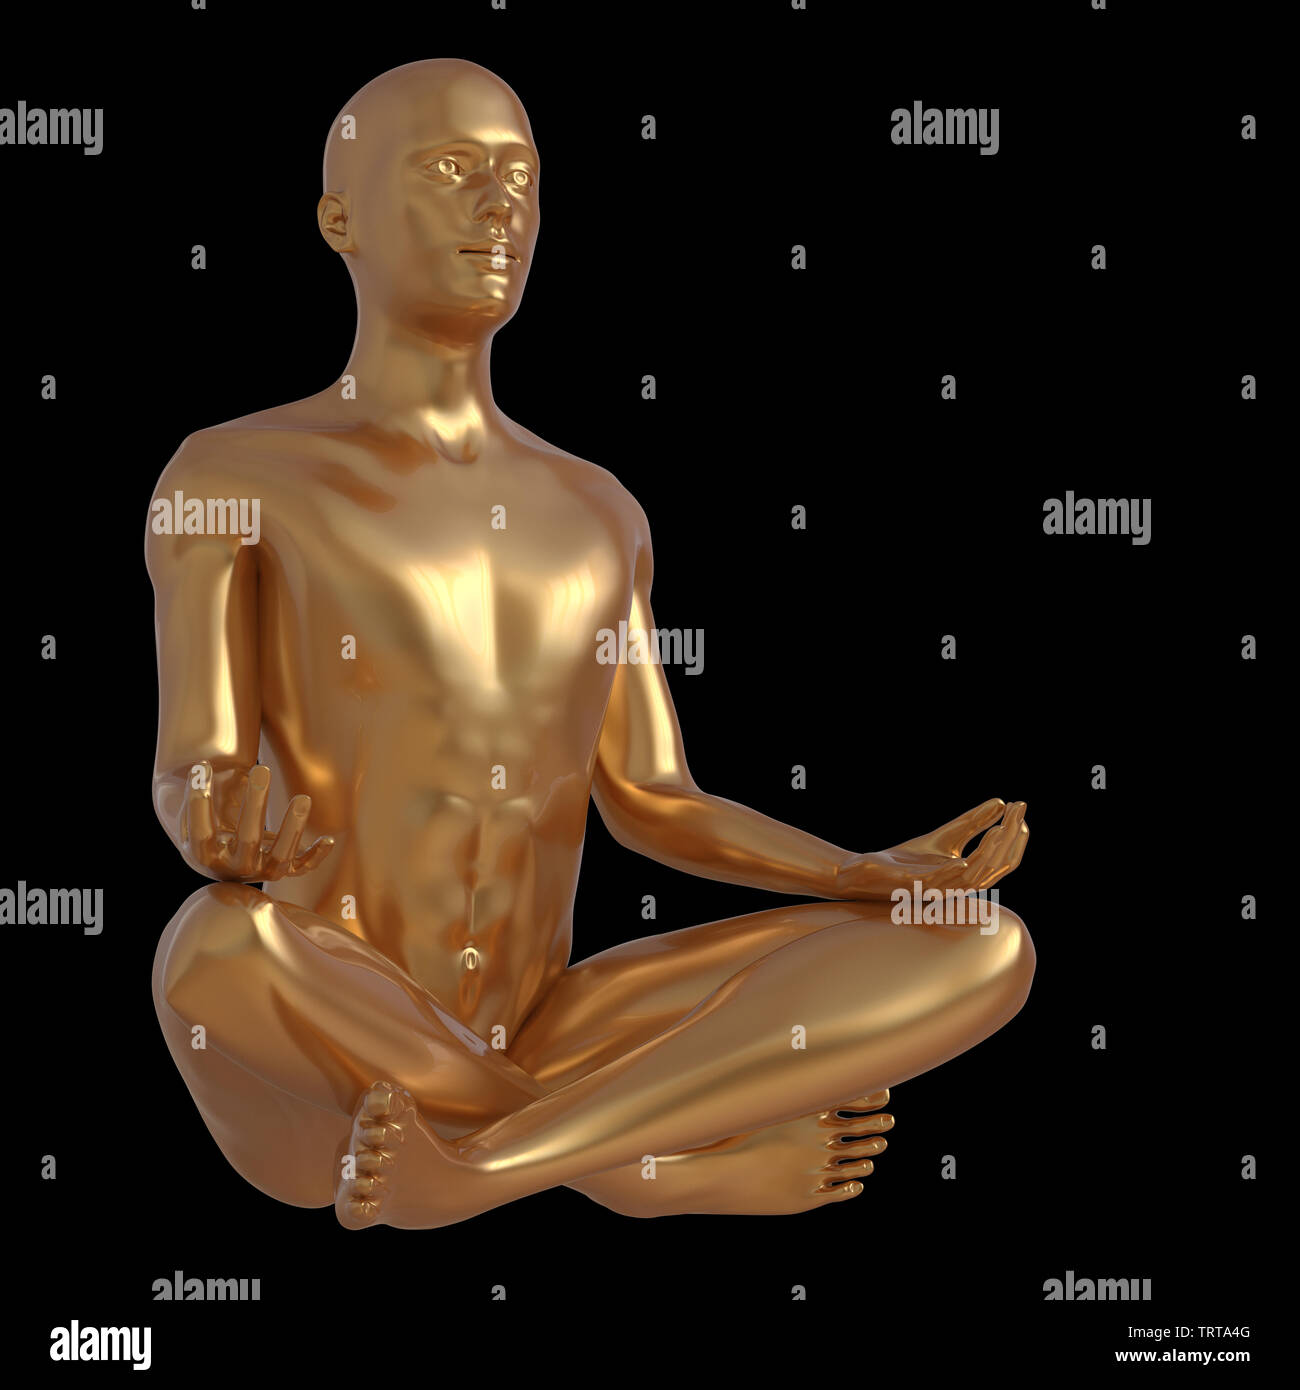 Yoga Pose - Yoga pose of a man in sunglasses - CleanPNG / KissPNG